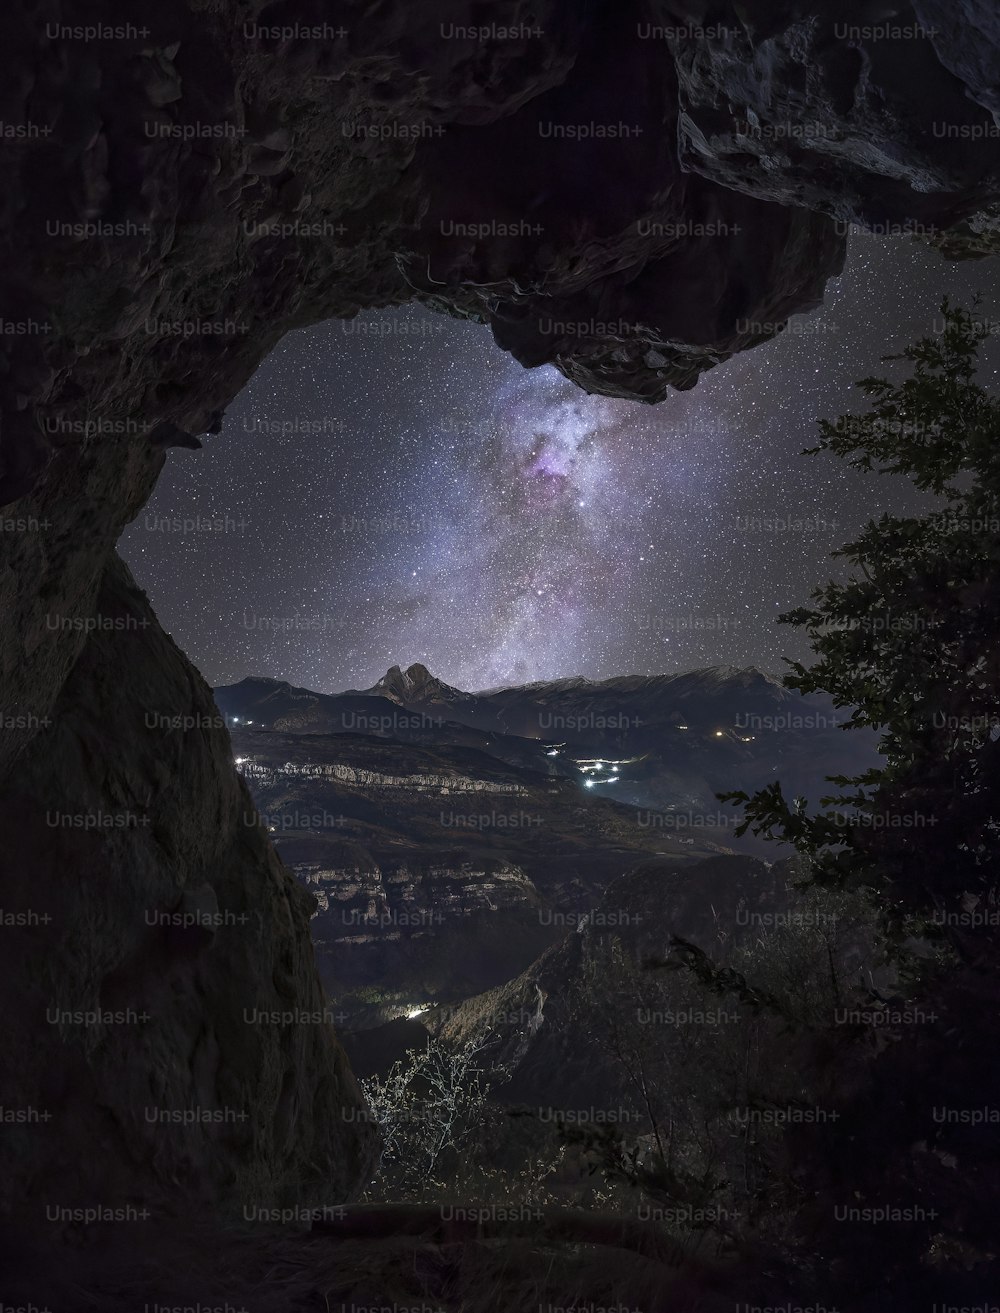 a view of the night sky from inside a cave